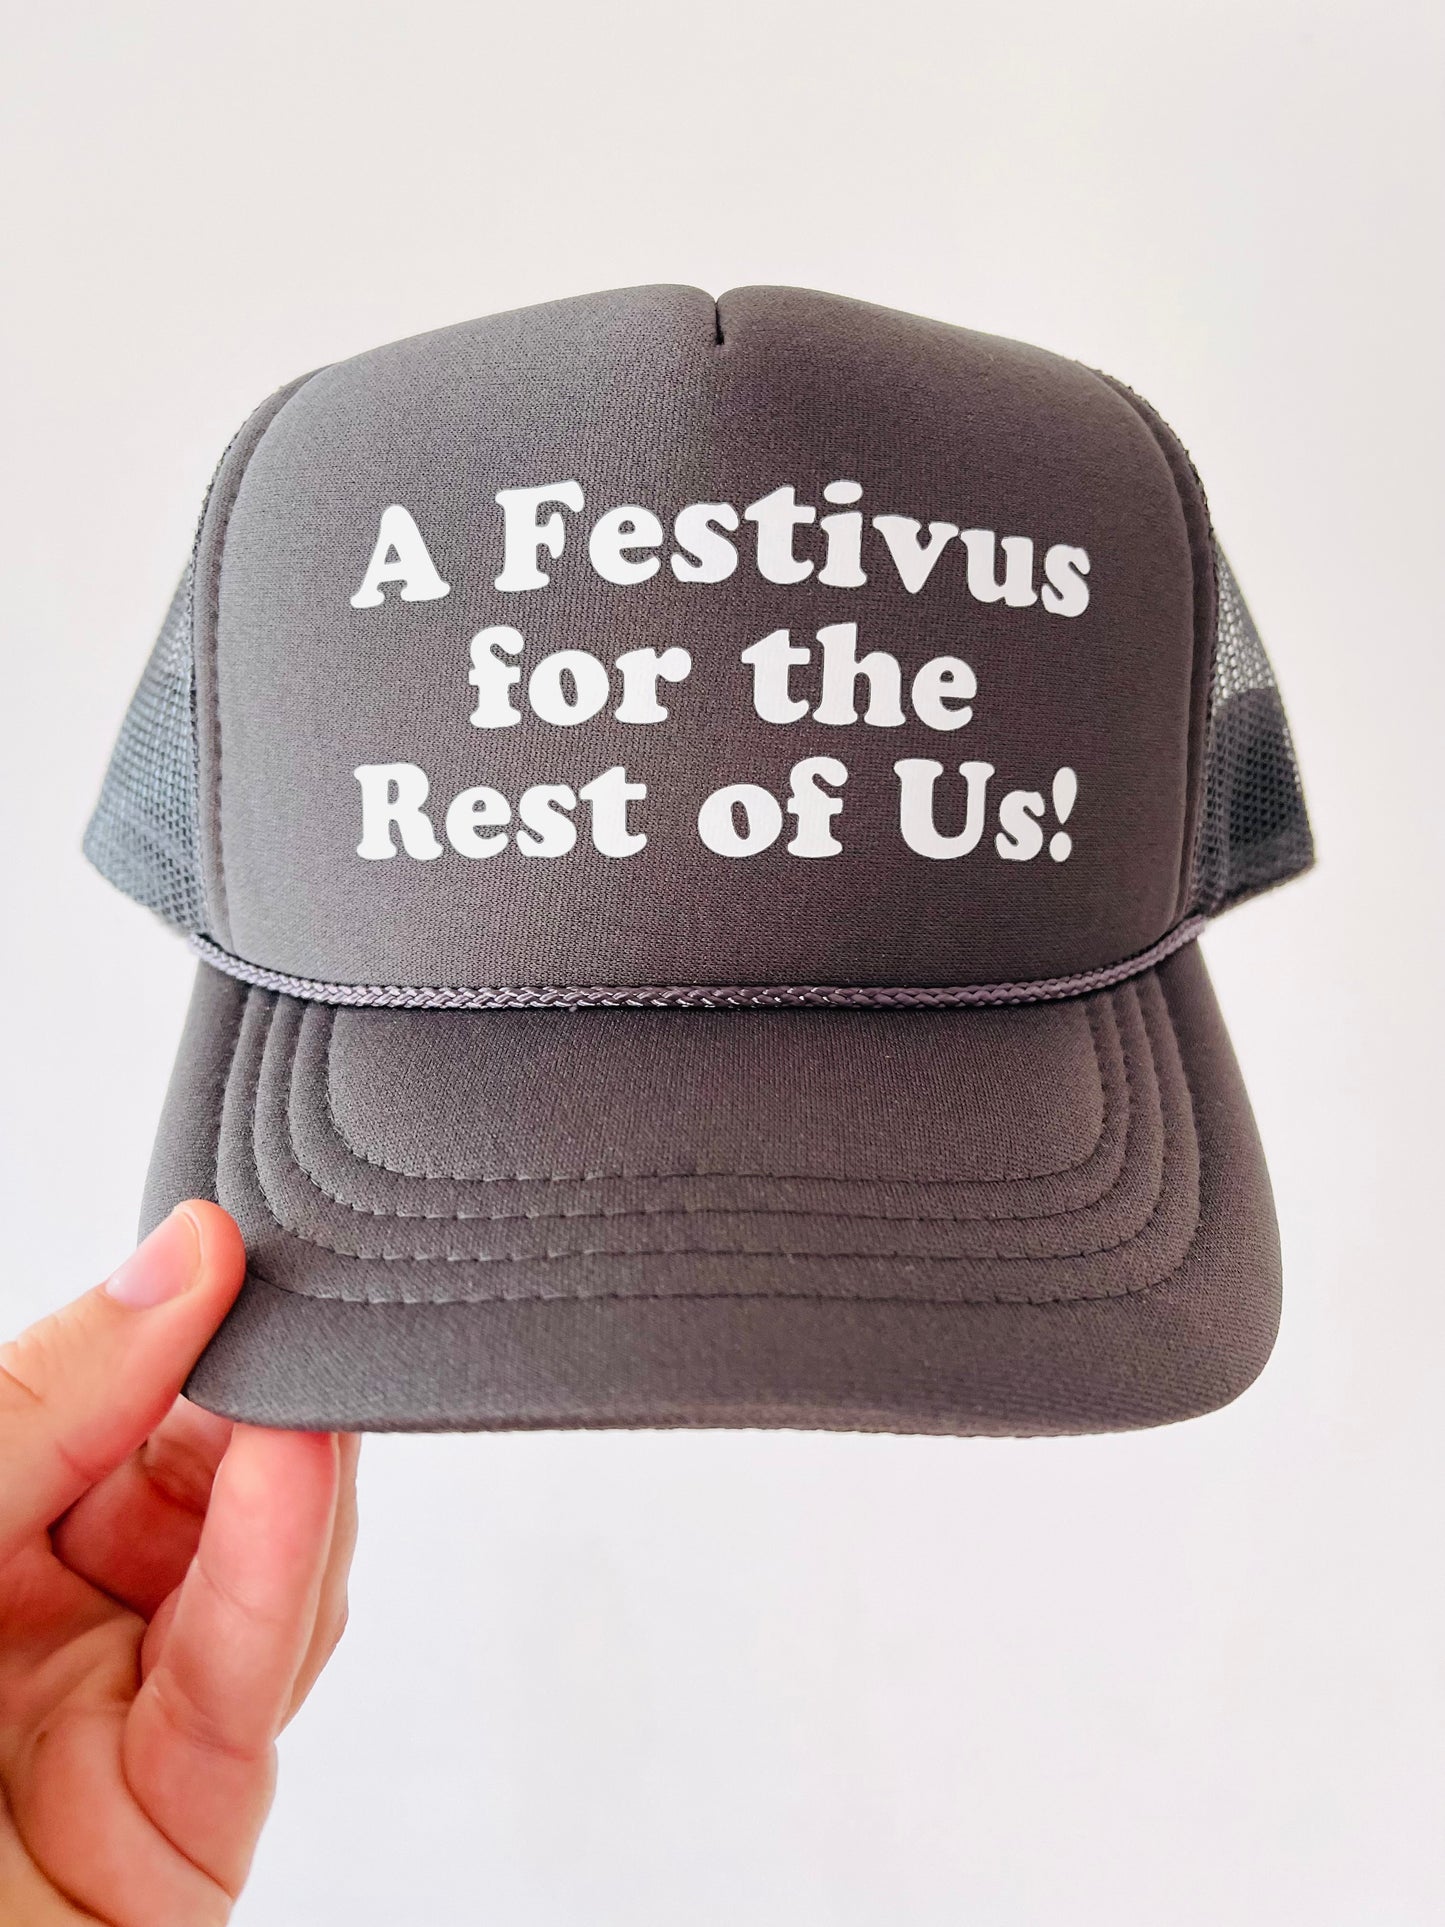 “A Festivus for the Rest of Us!” (Seinfeld)